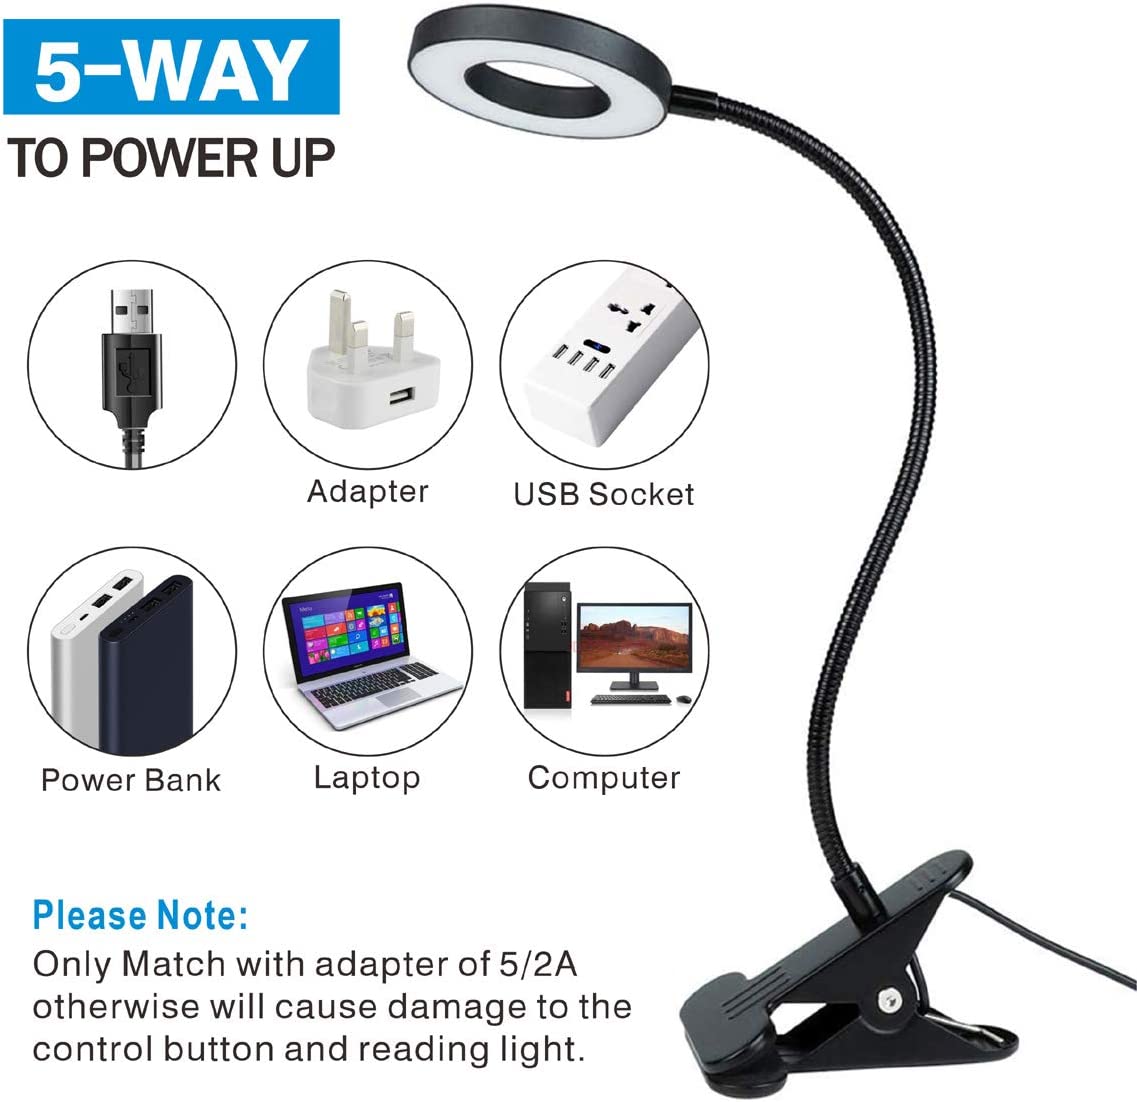 KNAMKY USB [Energy Class A++] LED Clip Lamp, 3 Light Mode, 10 Dimmable Brightness, Eye Caring Desk/Book Light for Reading, Studying, Working, and Video Conferencing (Black) 6